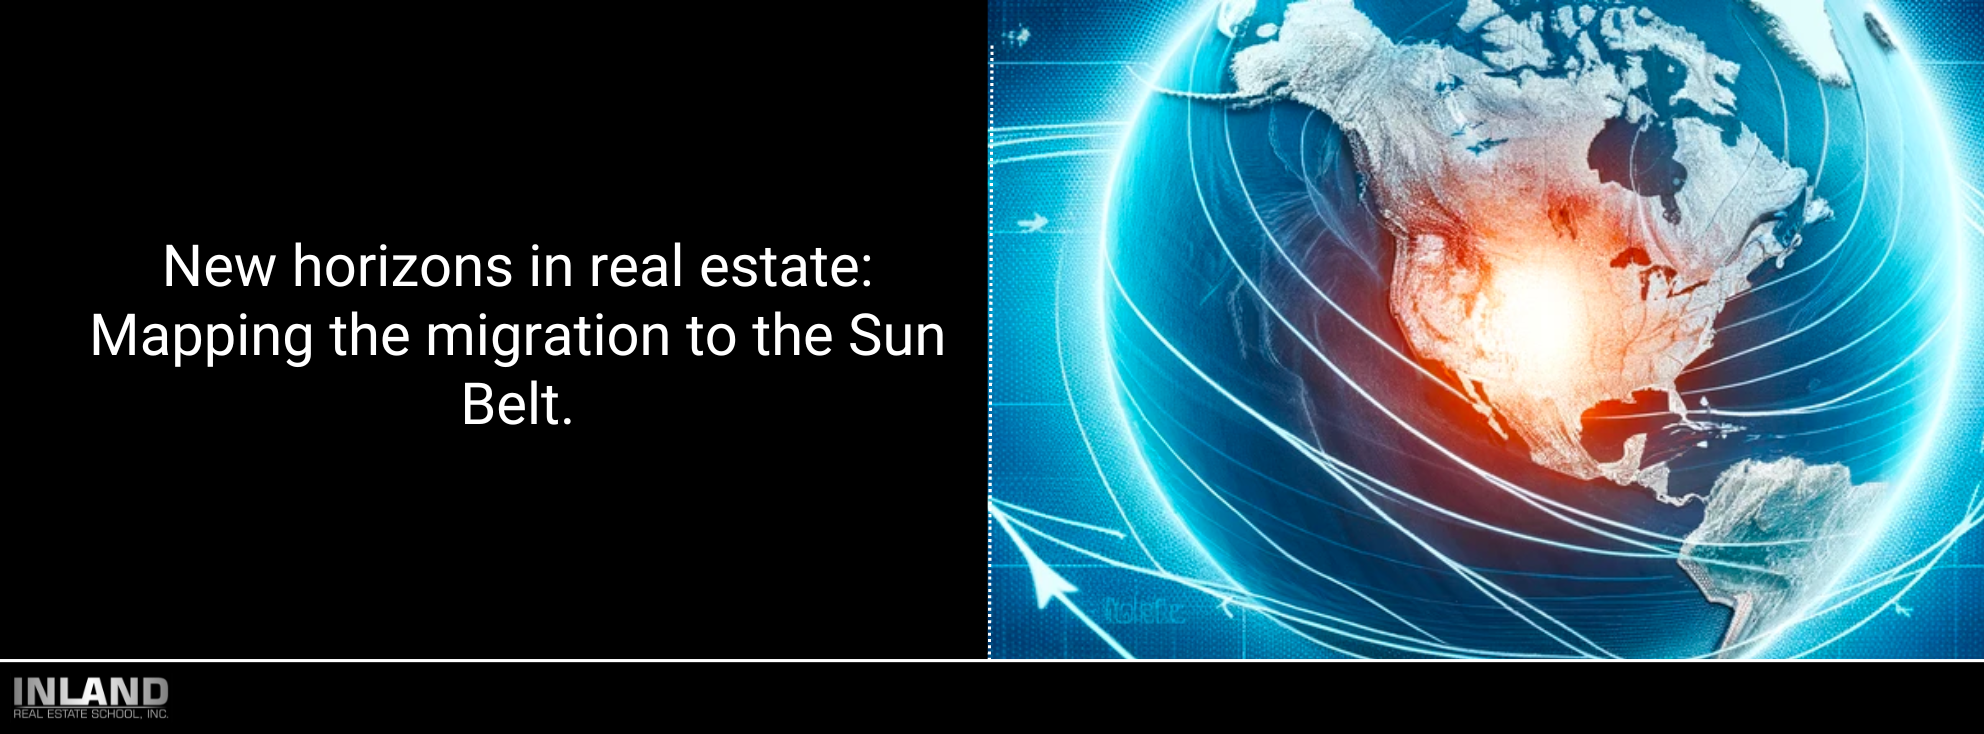 New horizons in real estate: Mapping the migration to the Sun Belt